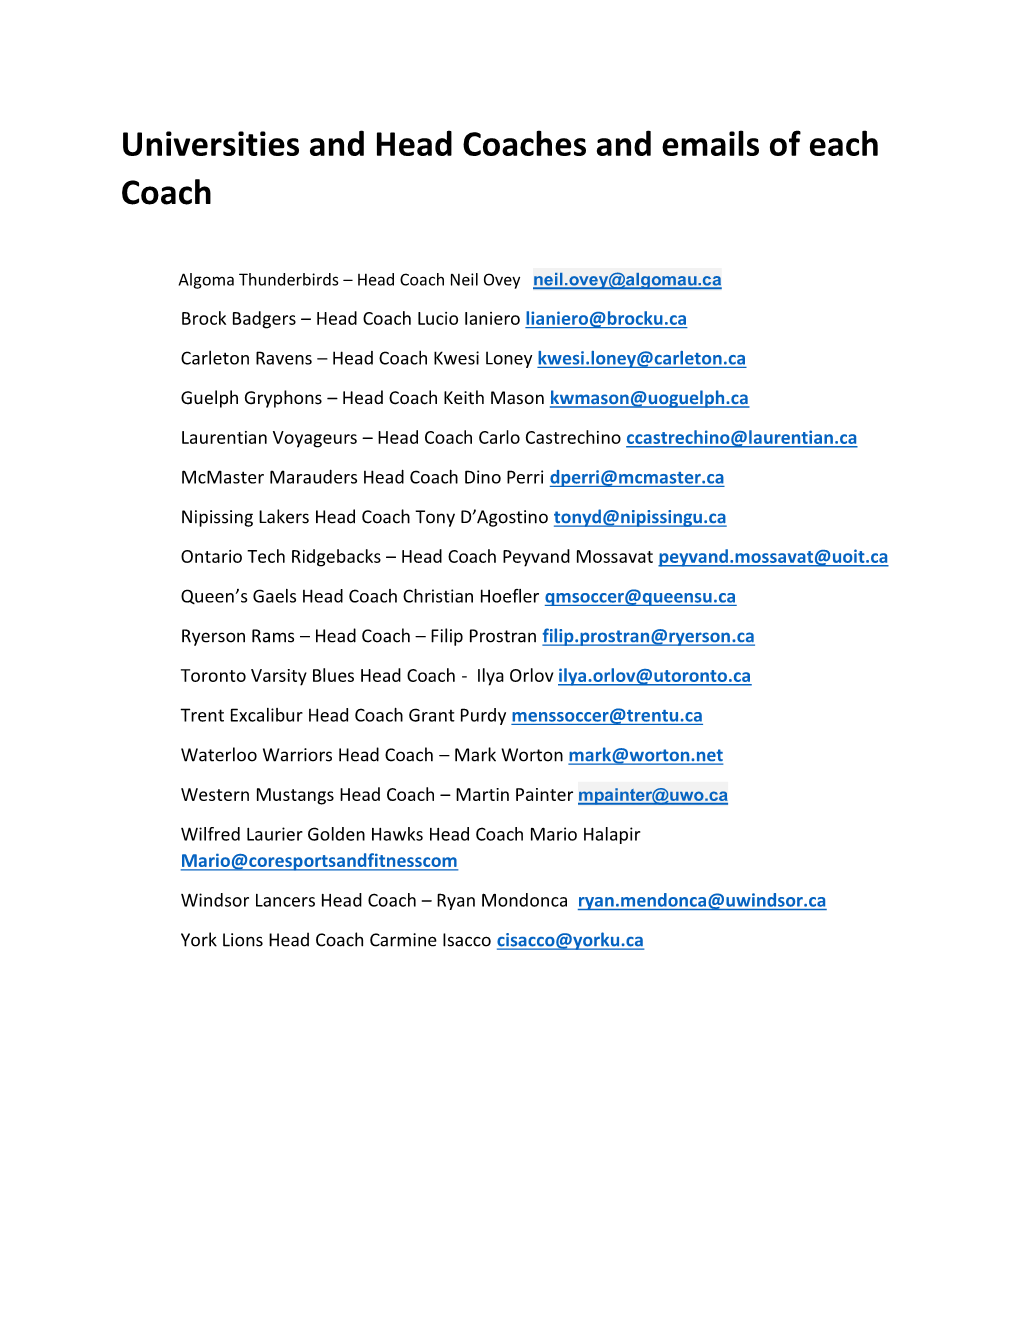 Universities and Head Coaches and Emails of Each Coach